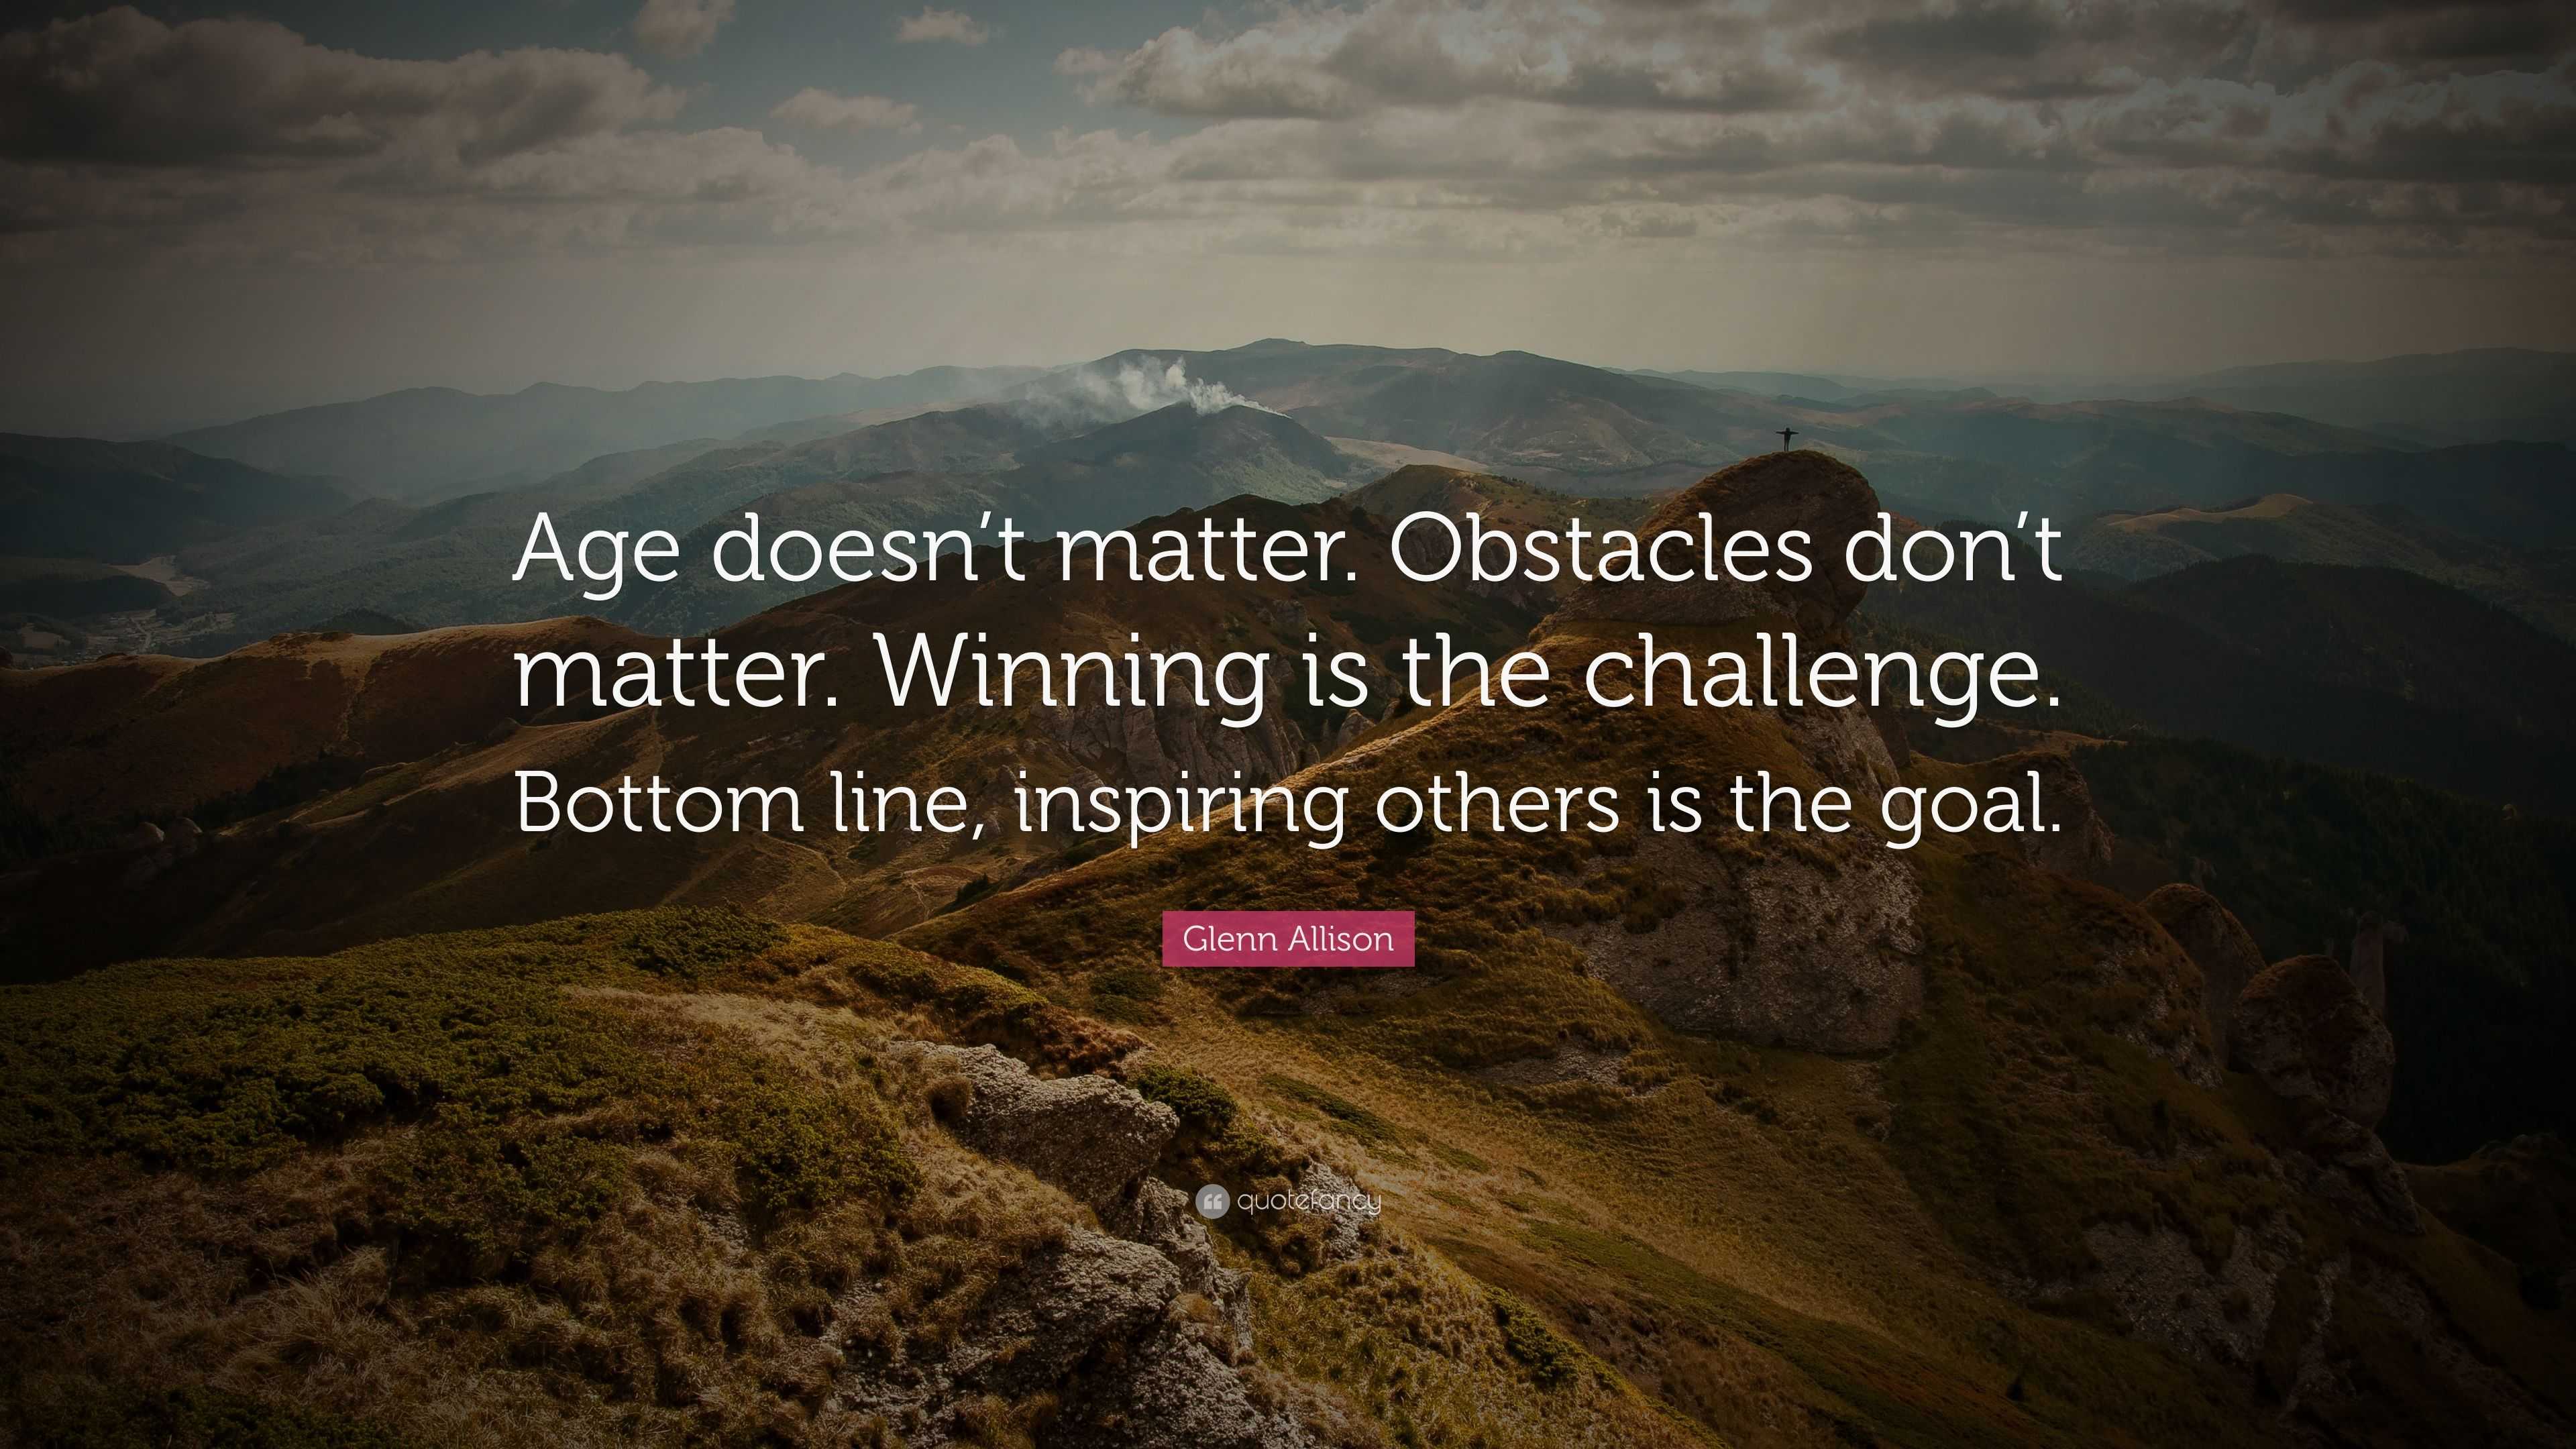 Glenn Allison Quote: “Age doesn't matter. Obstacles don't matter. Winning  is the challenge. Bottom